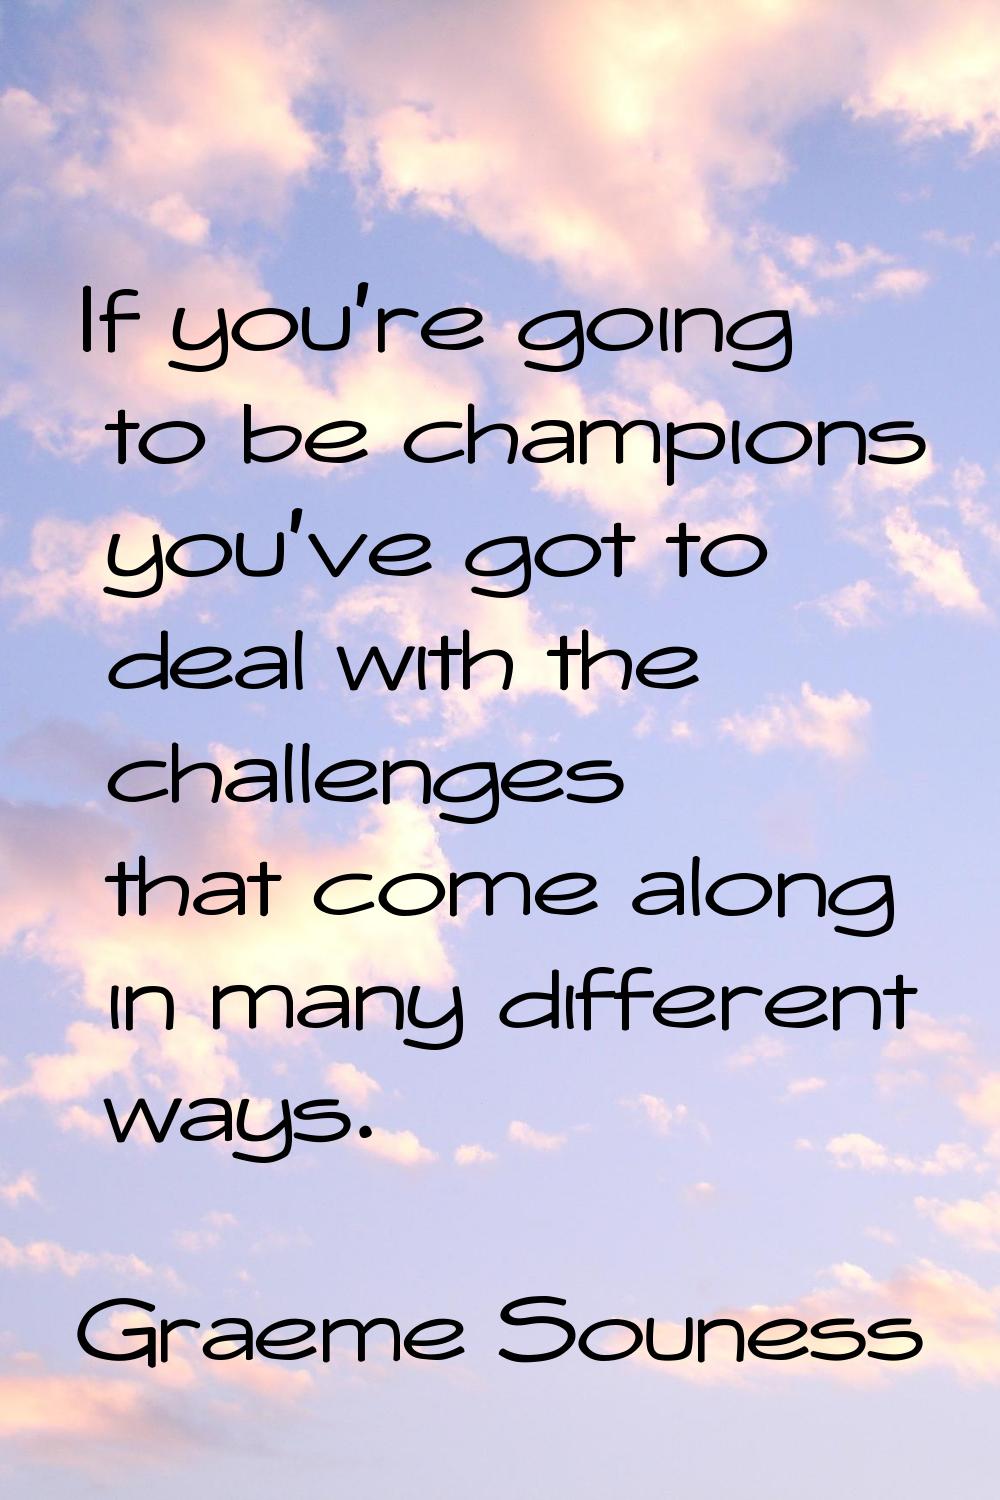 If you're going to be champions you've got to deal with the challenges that come along in many diff